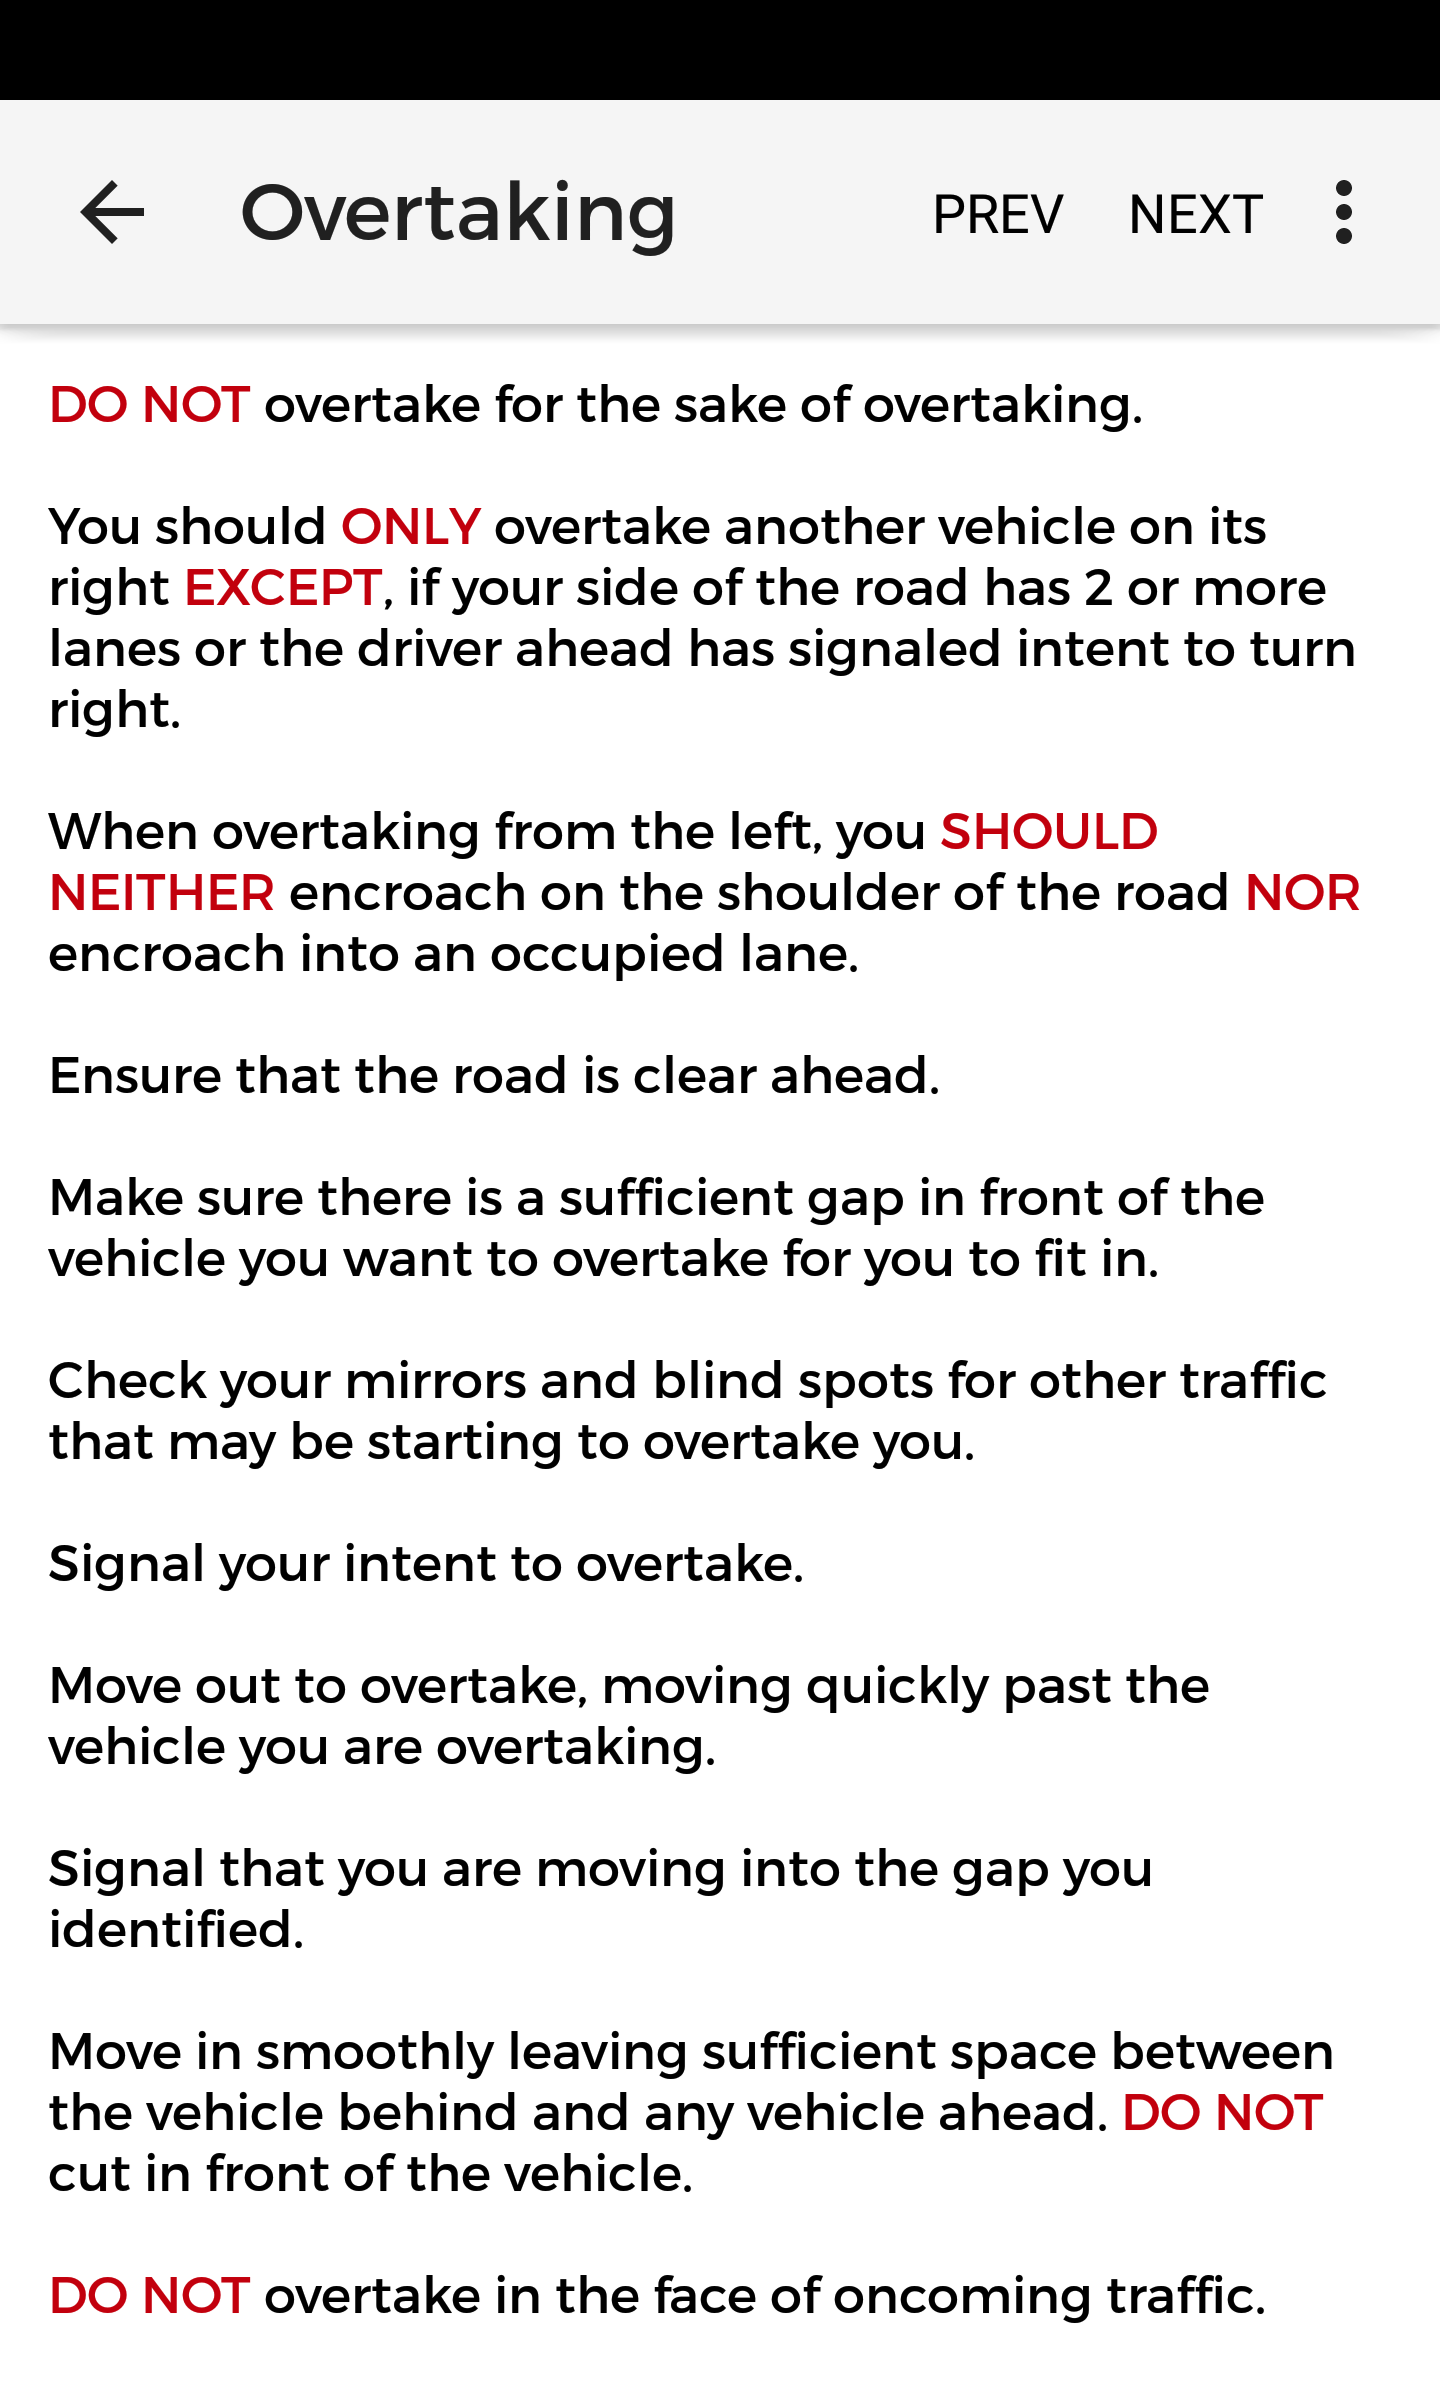 Android application Provisional Theory, the Highway Code Companion screenshort